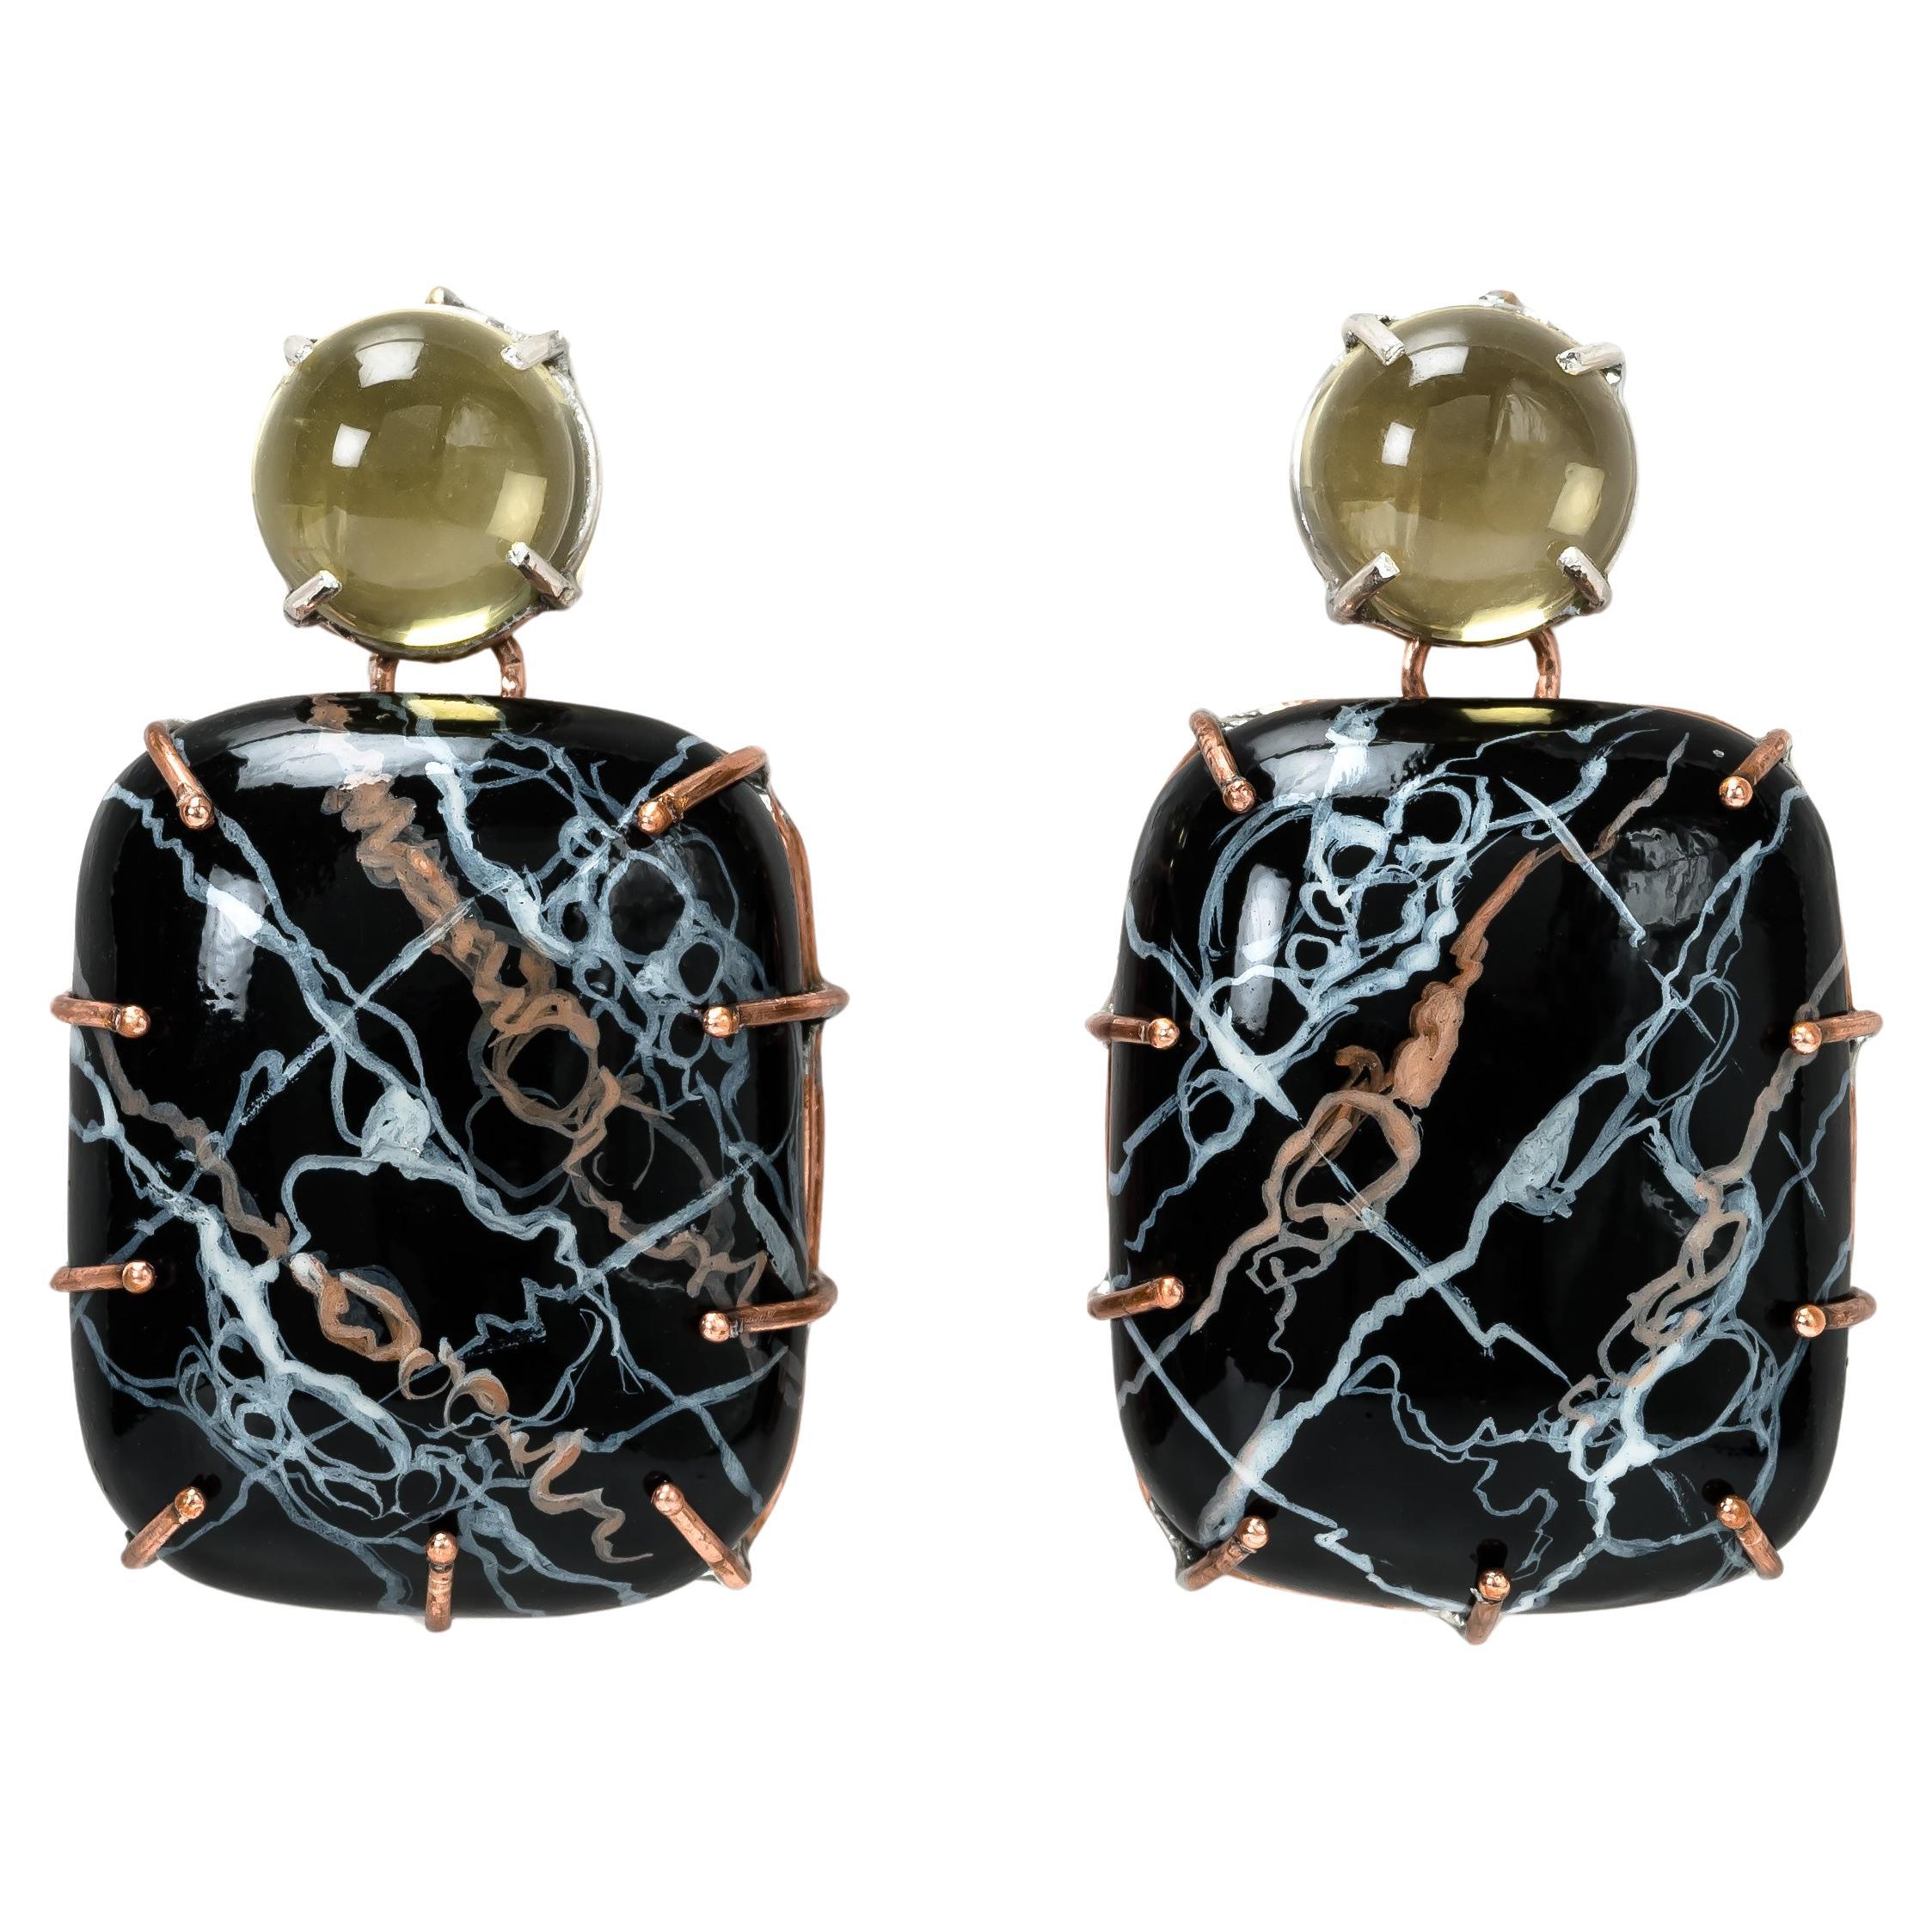 Bodyfurnitures Earrings, Black Marble Painting, Citrines, Gold, Silver, Copper